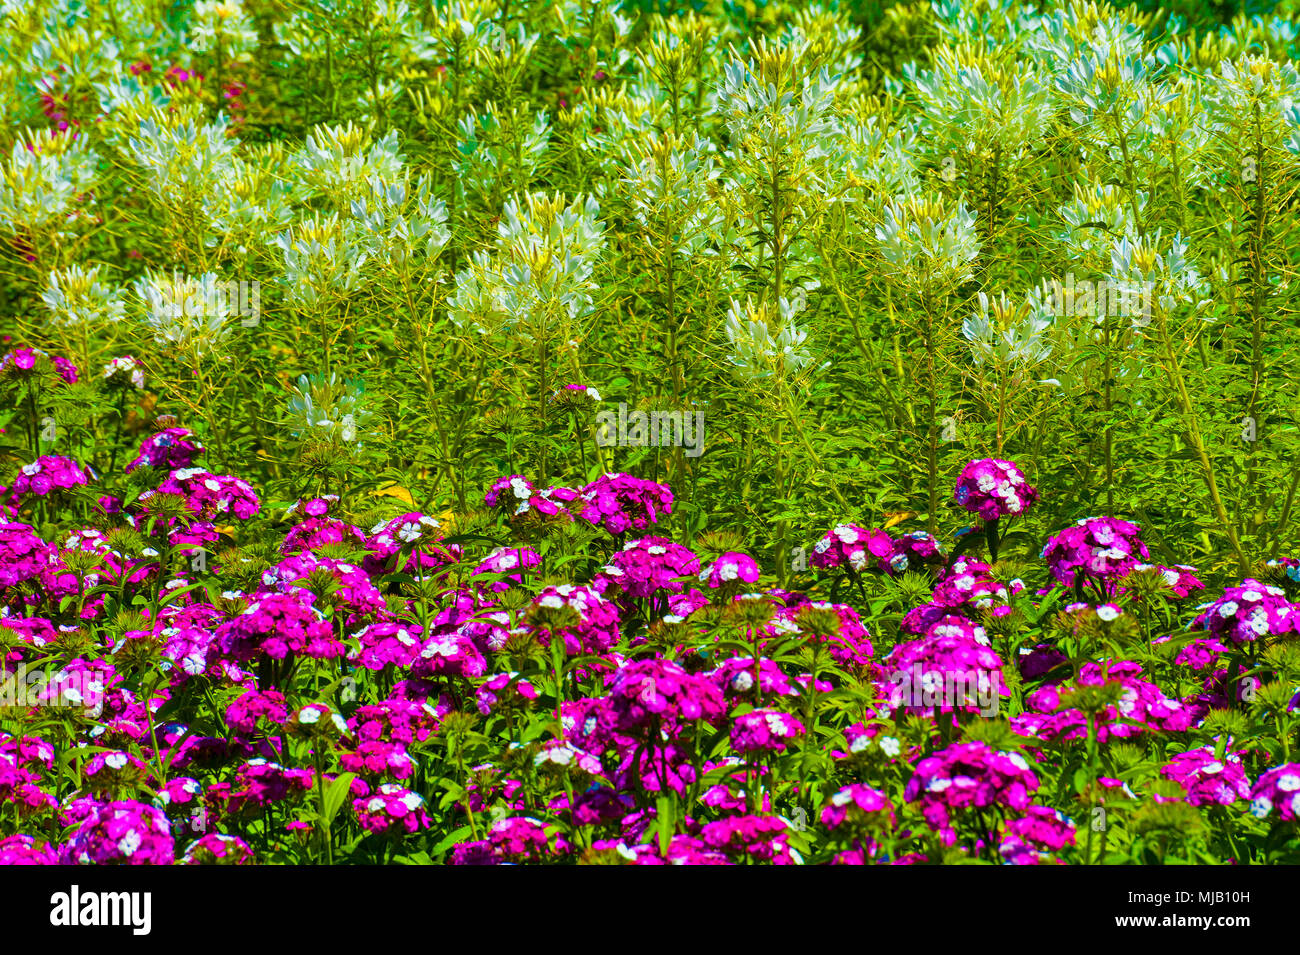 A close up of a flowerbed with sweet william blooming in the foreground a a light airly taller flowering plant in the background Stock Photo